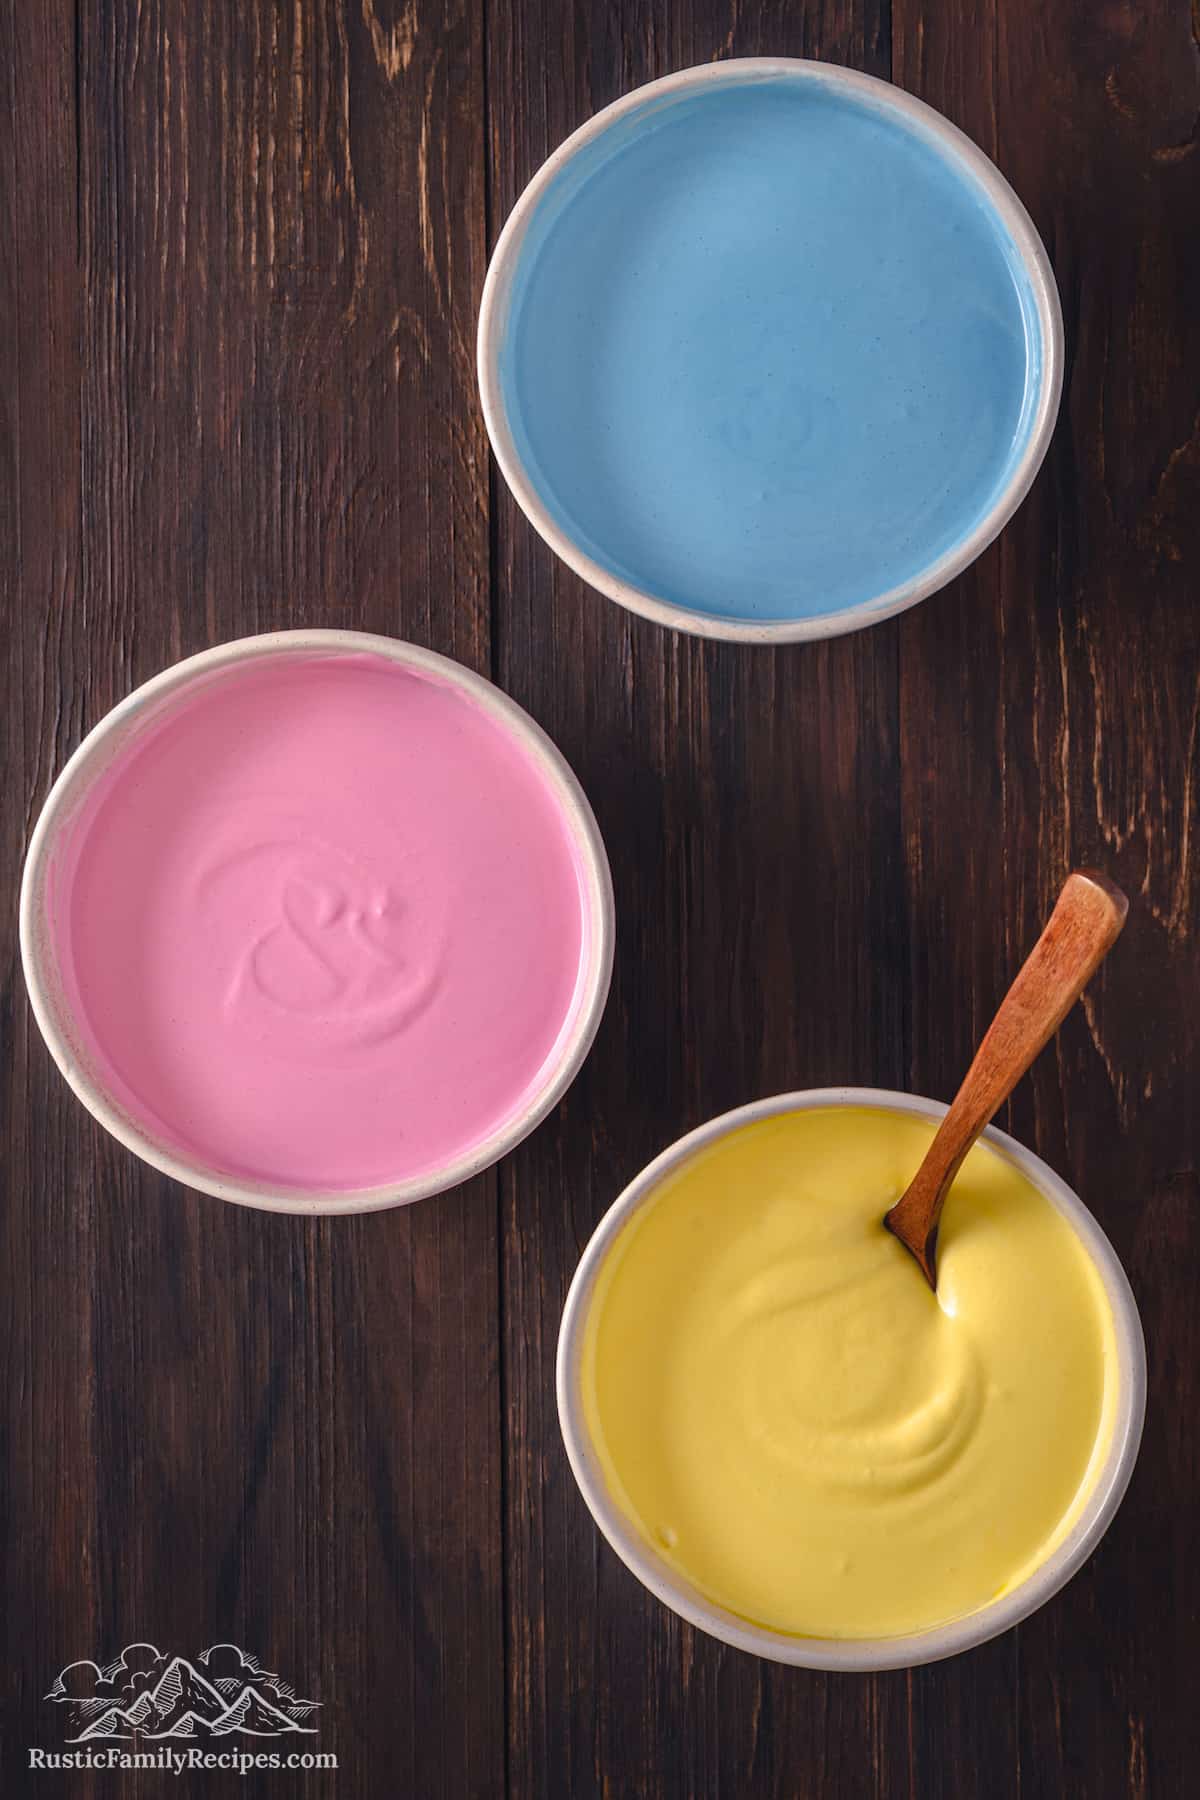 Top view of the three color varieties for Superman ice cream in separate bowls.